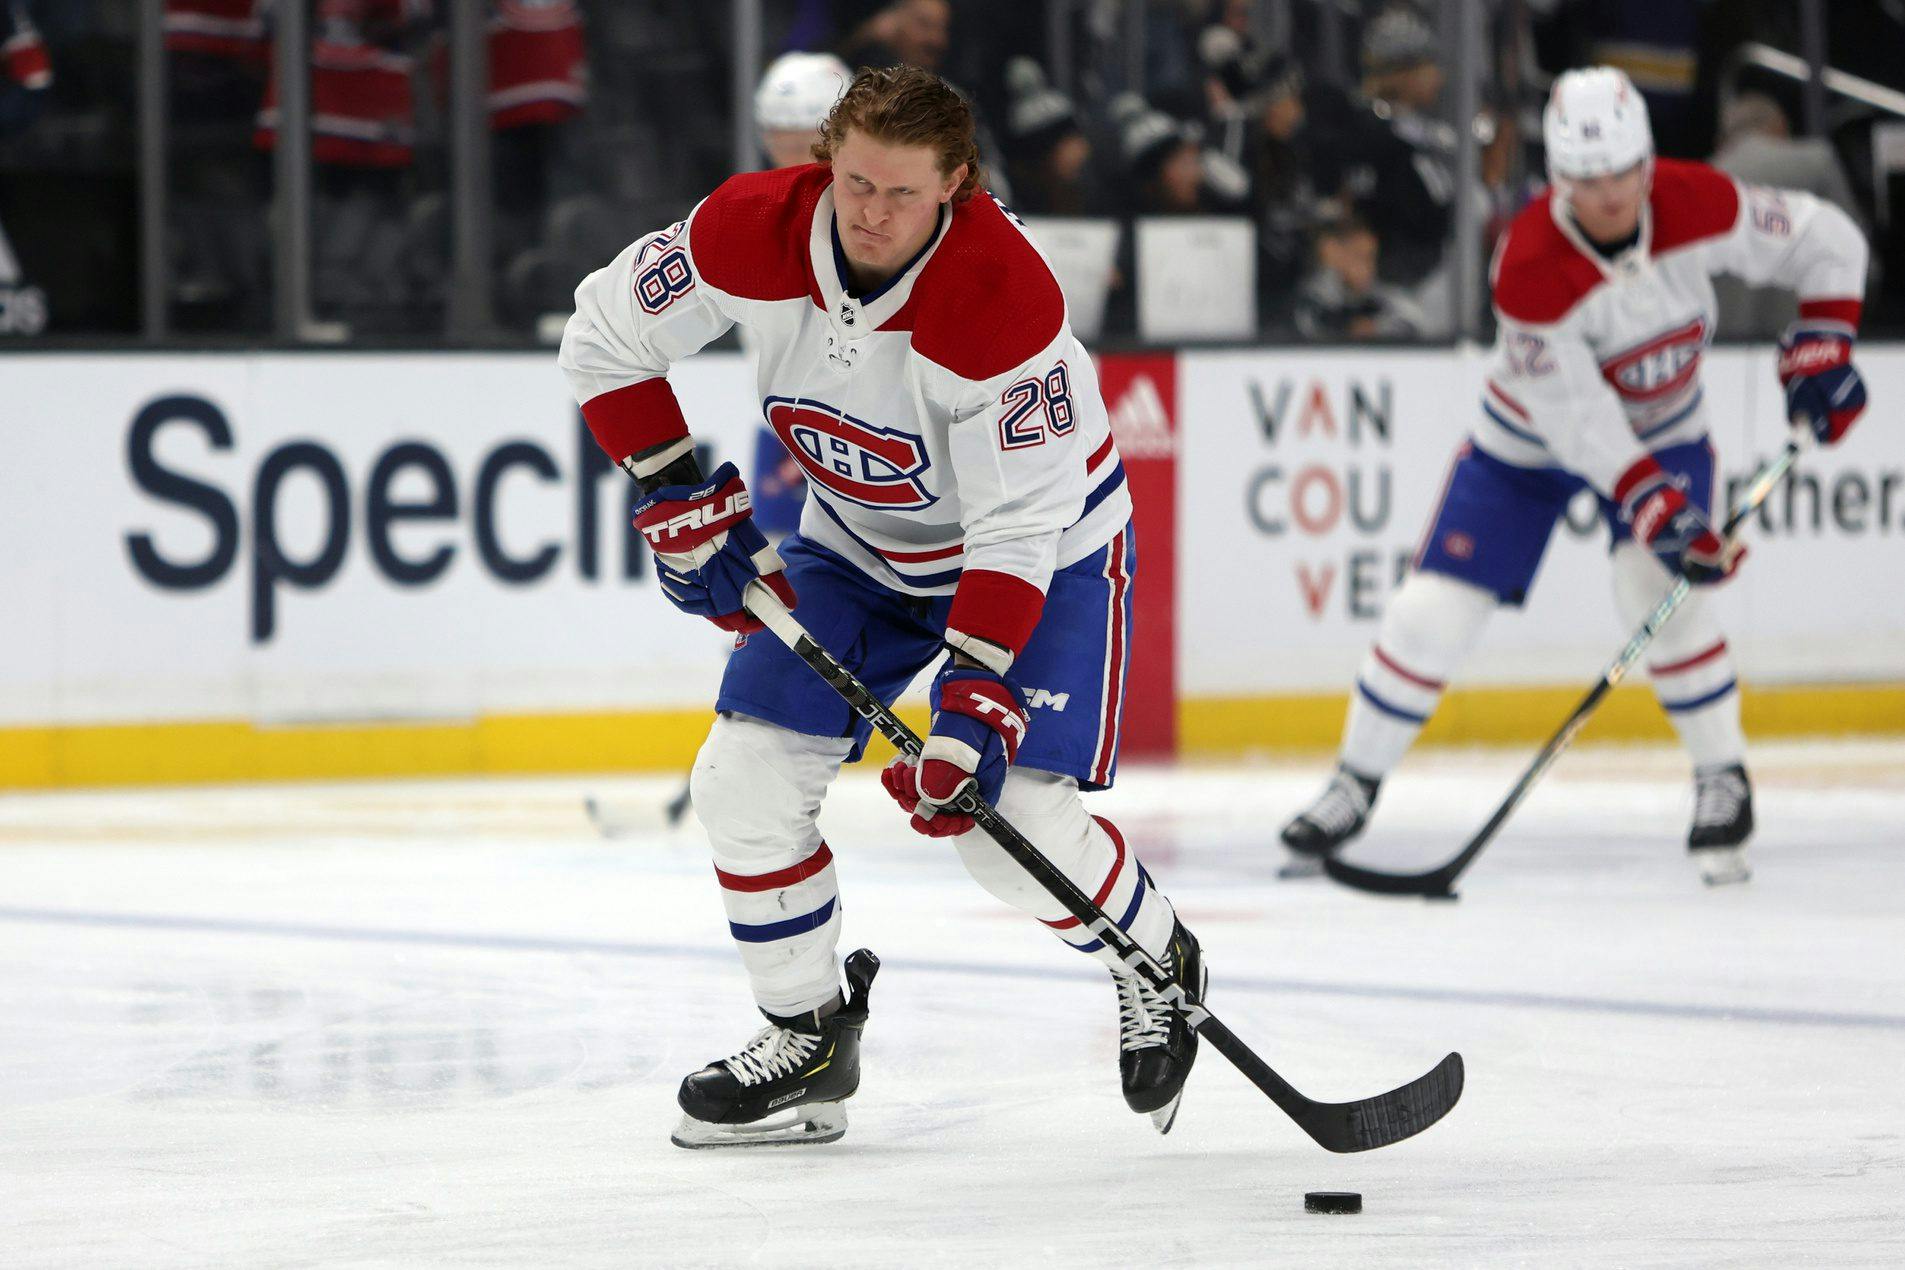 Montreal Canadiens forward Christian Dvorak to miss rest of the season with injury